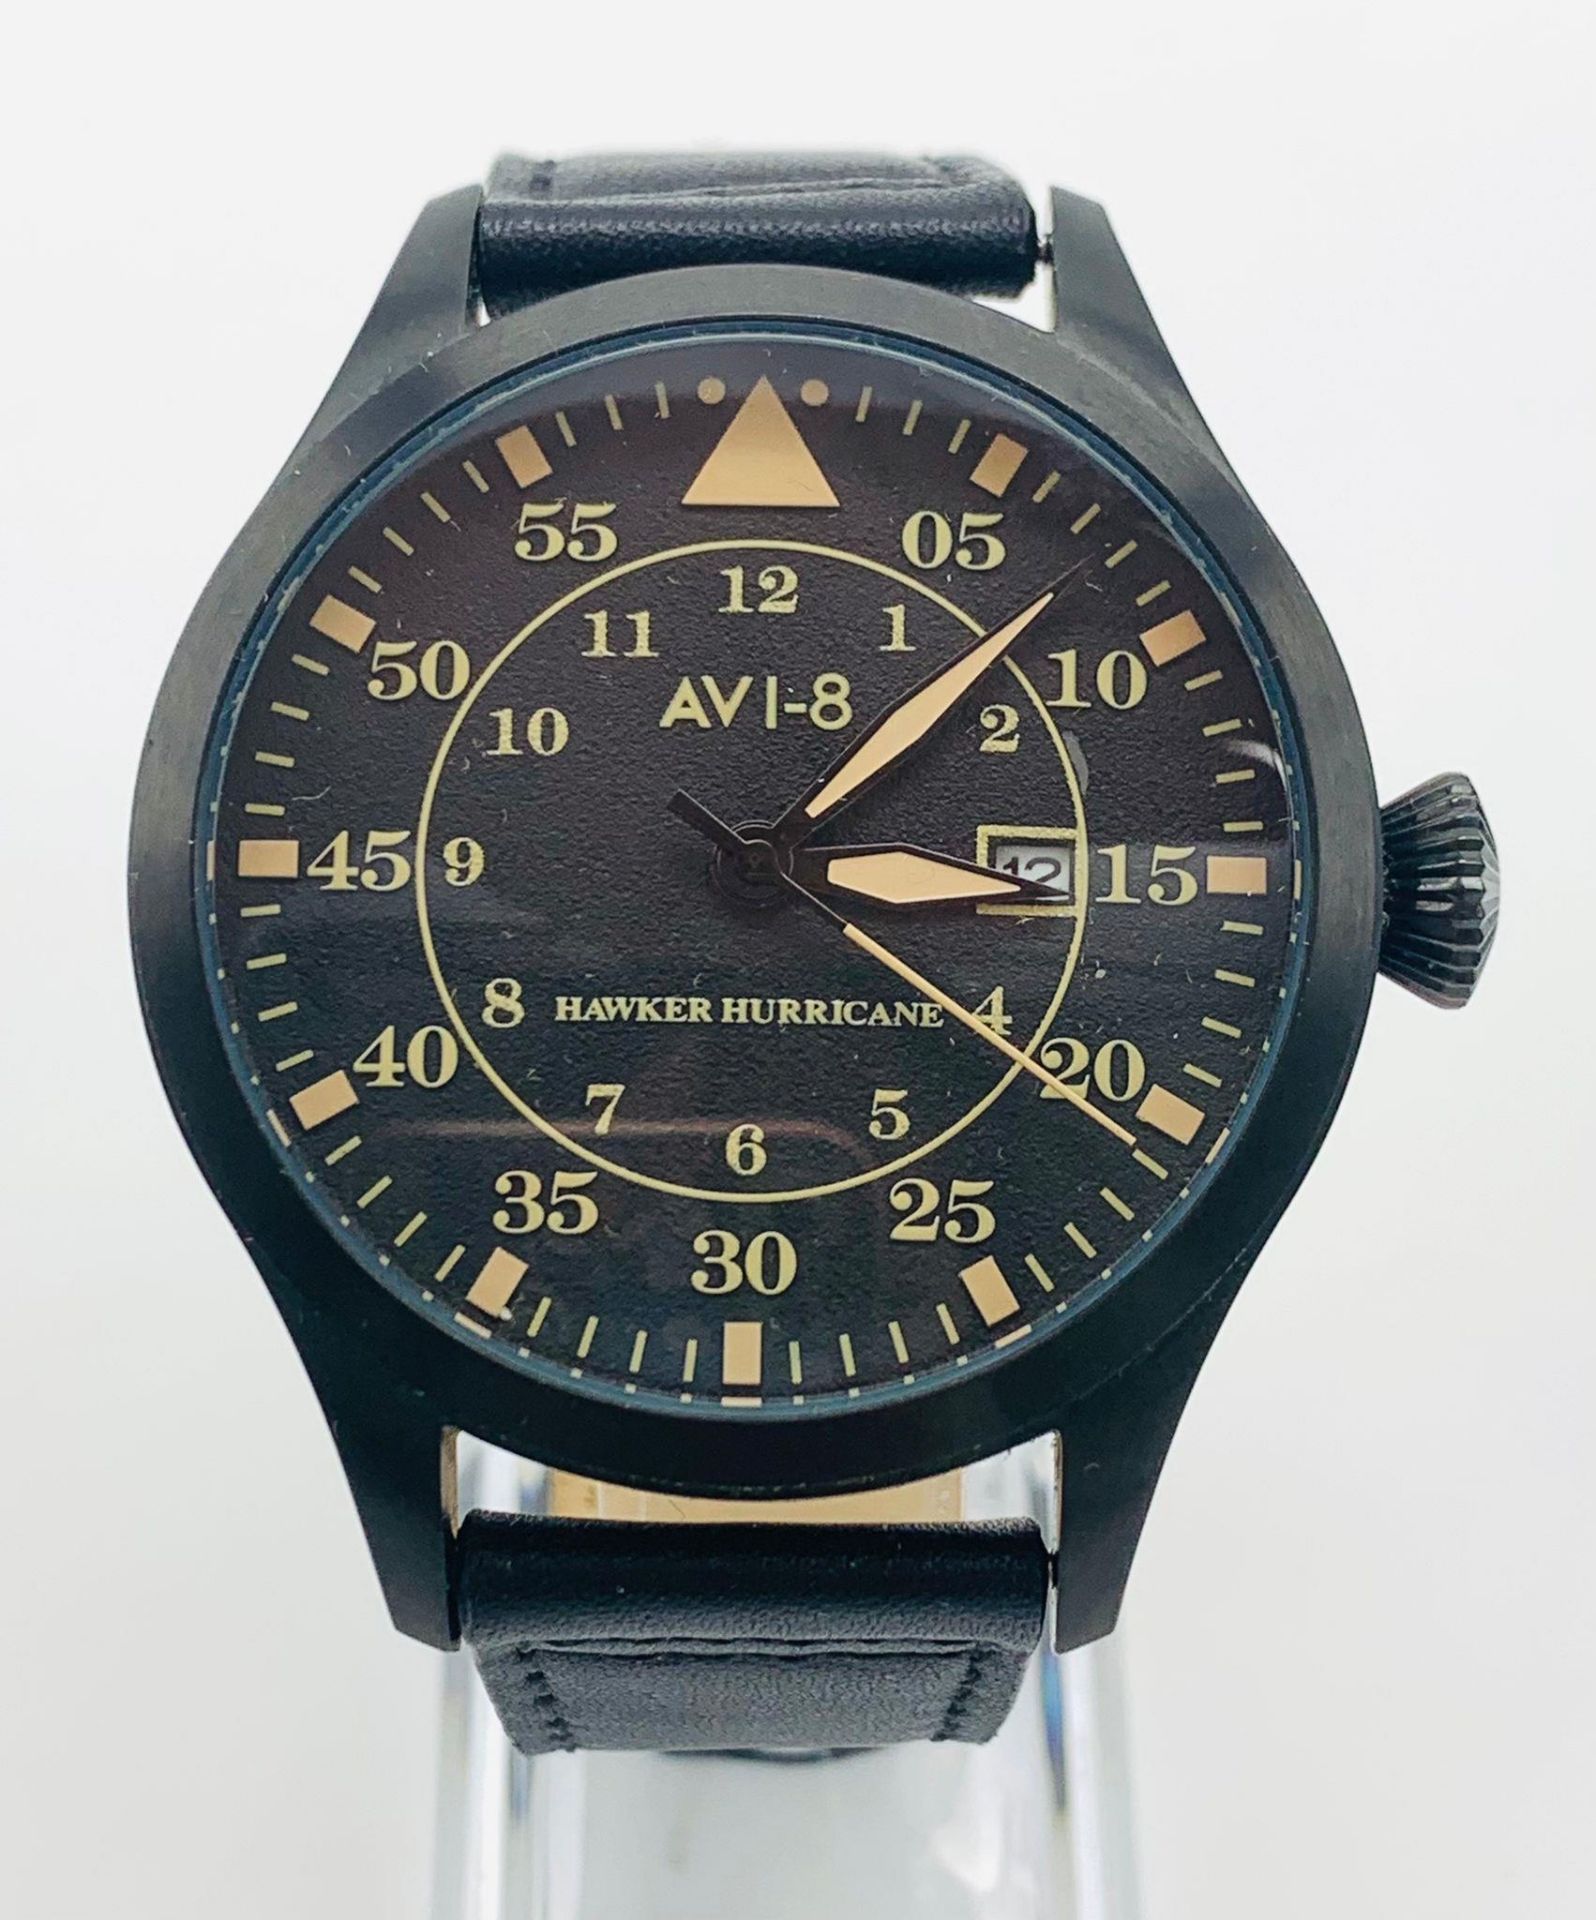 Ex Display Limited Edition Hawker Hurricane Watch by AVI-8. 52mm including crown. 1 Year Battery